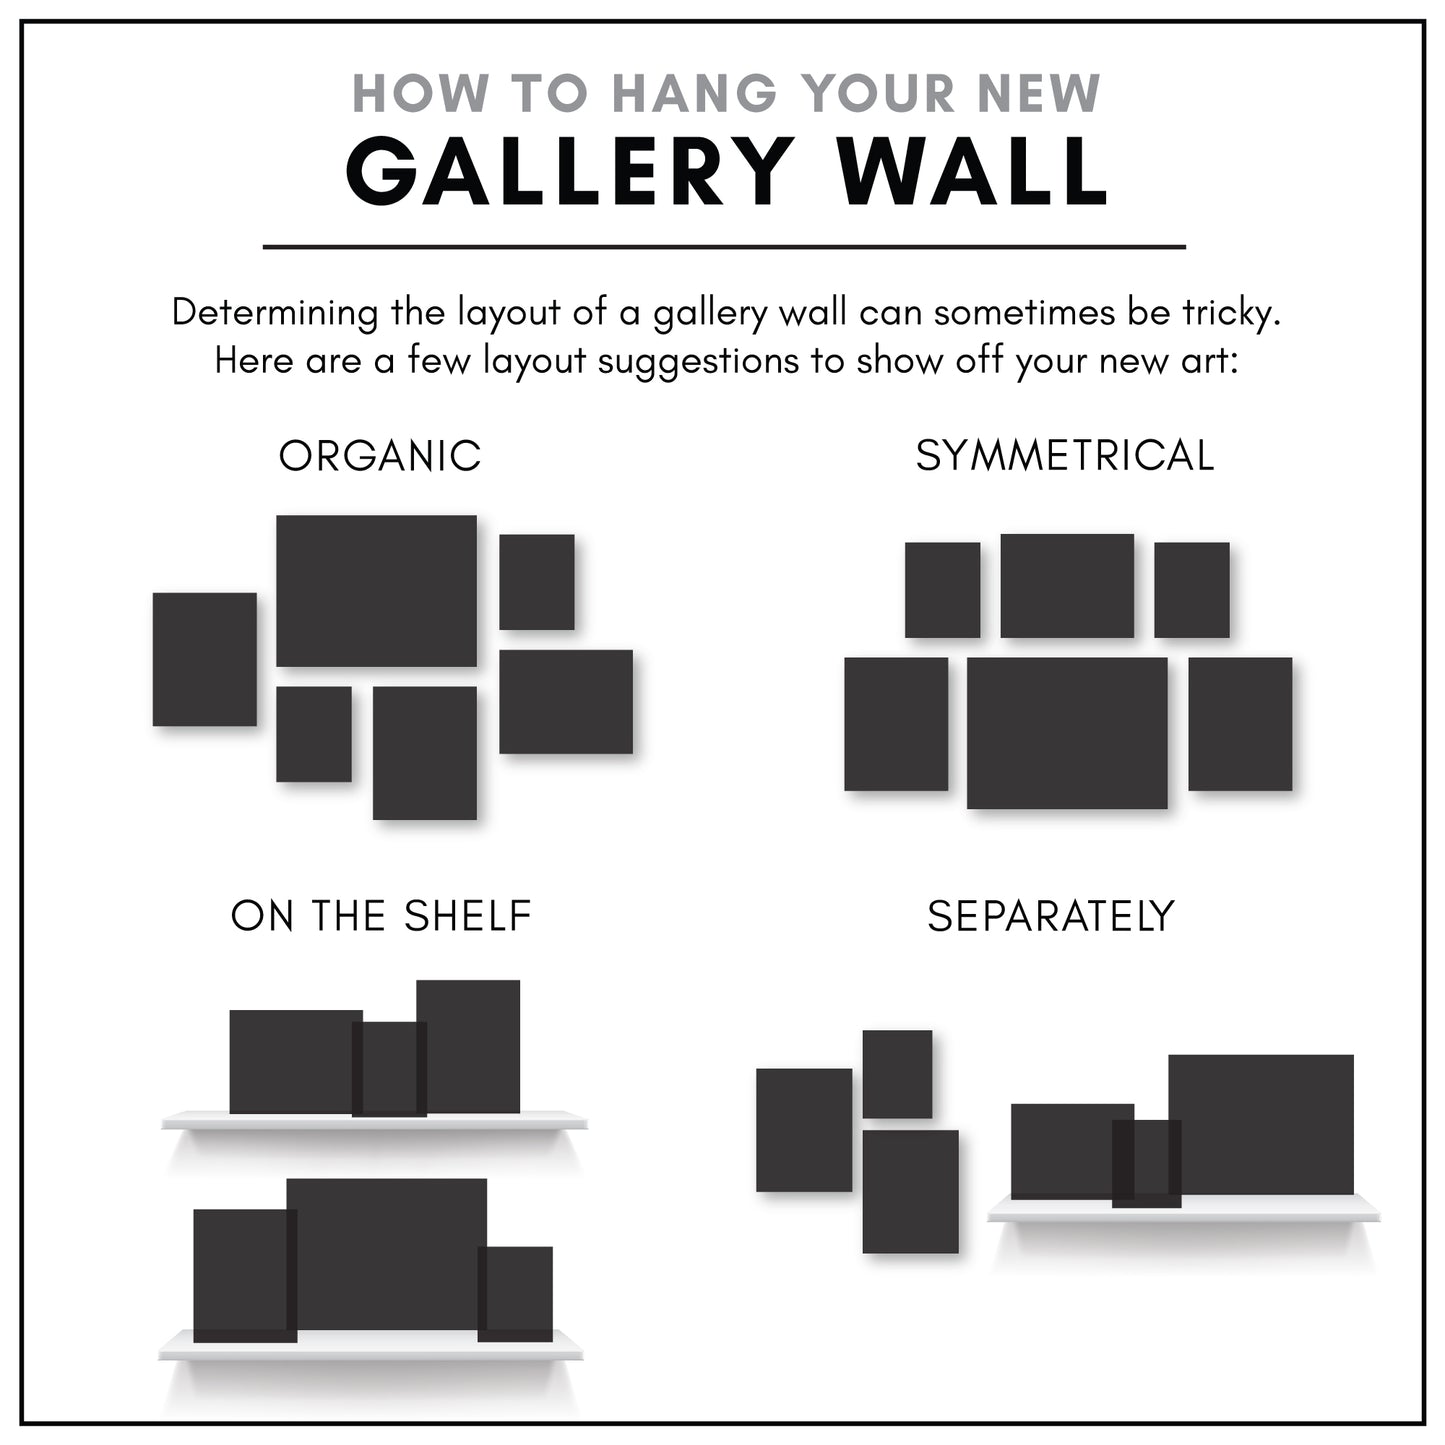 Black & White Southwest - 6 Piece Framed Gallery Wall Set - Variety of colors